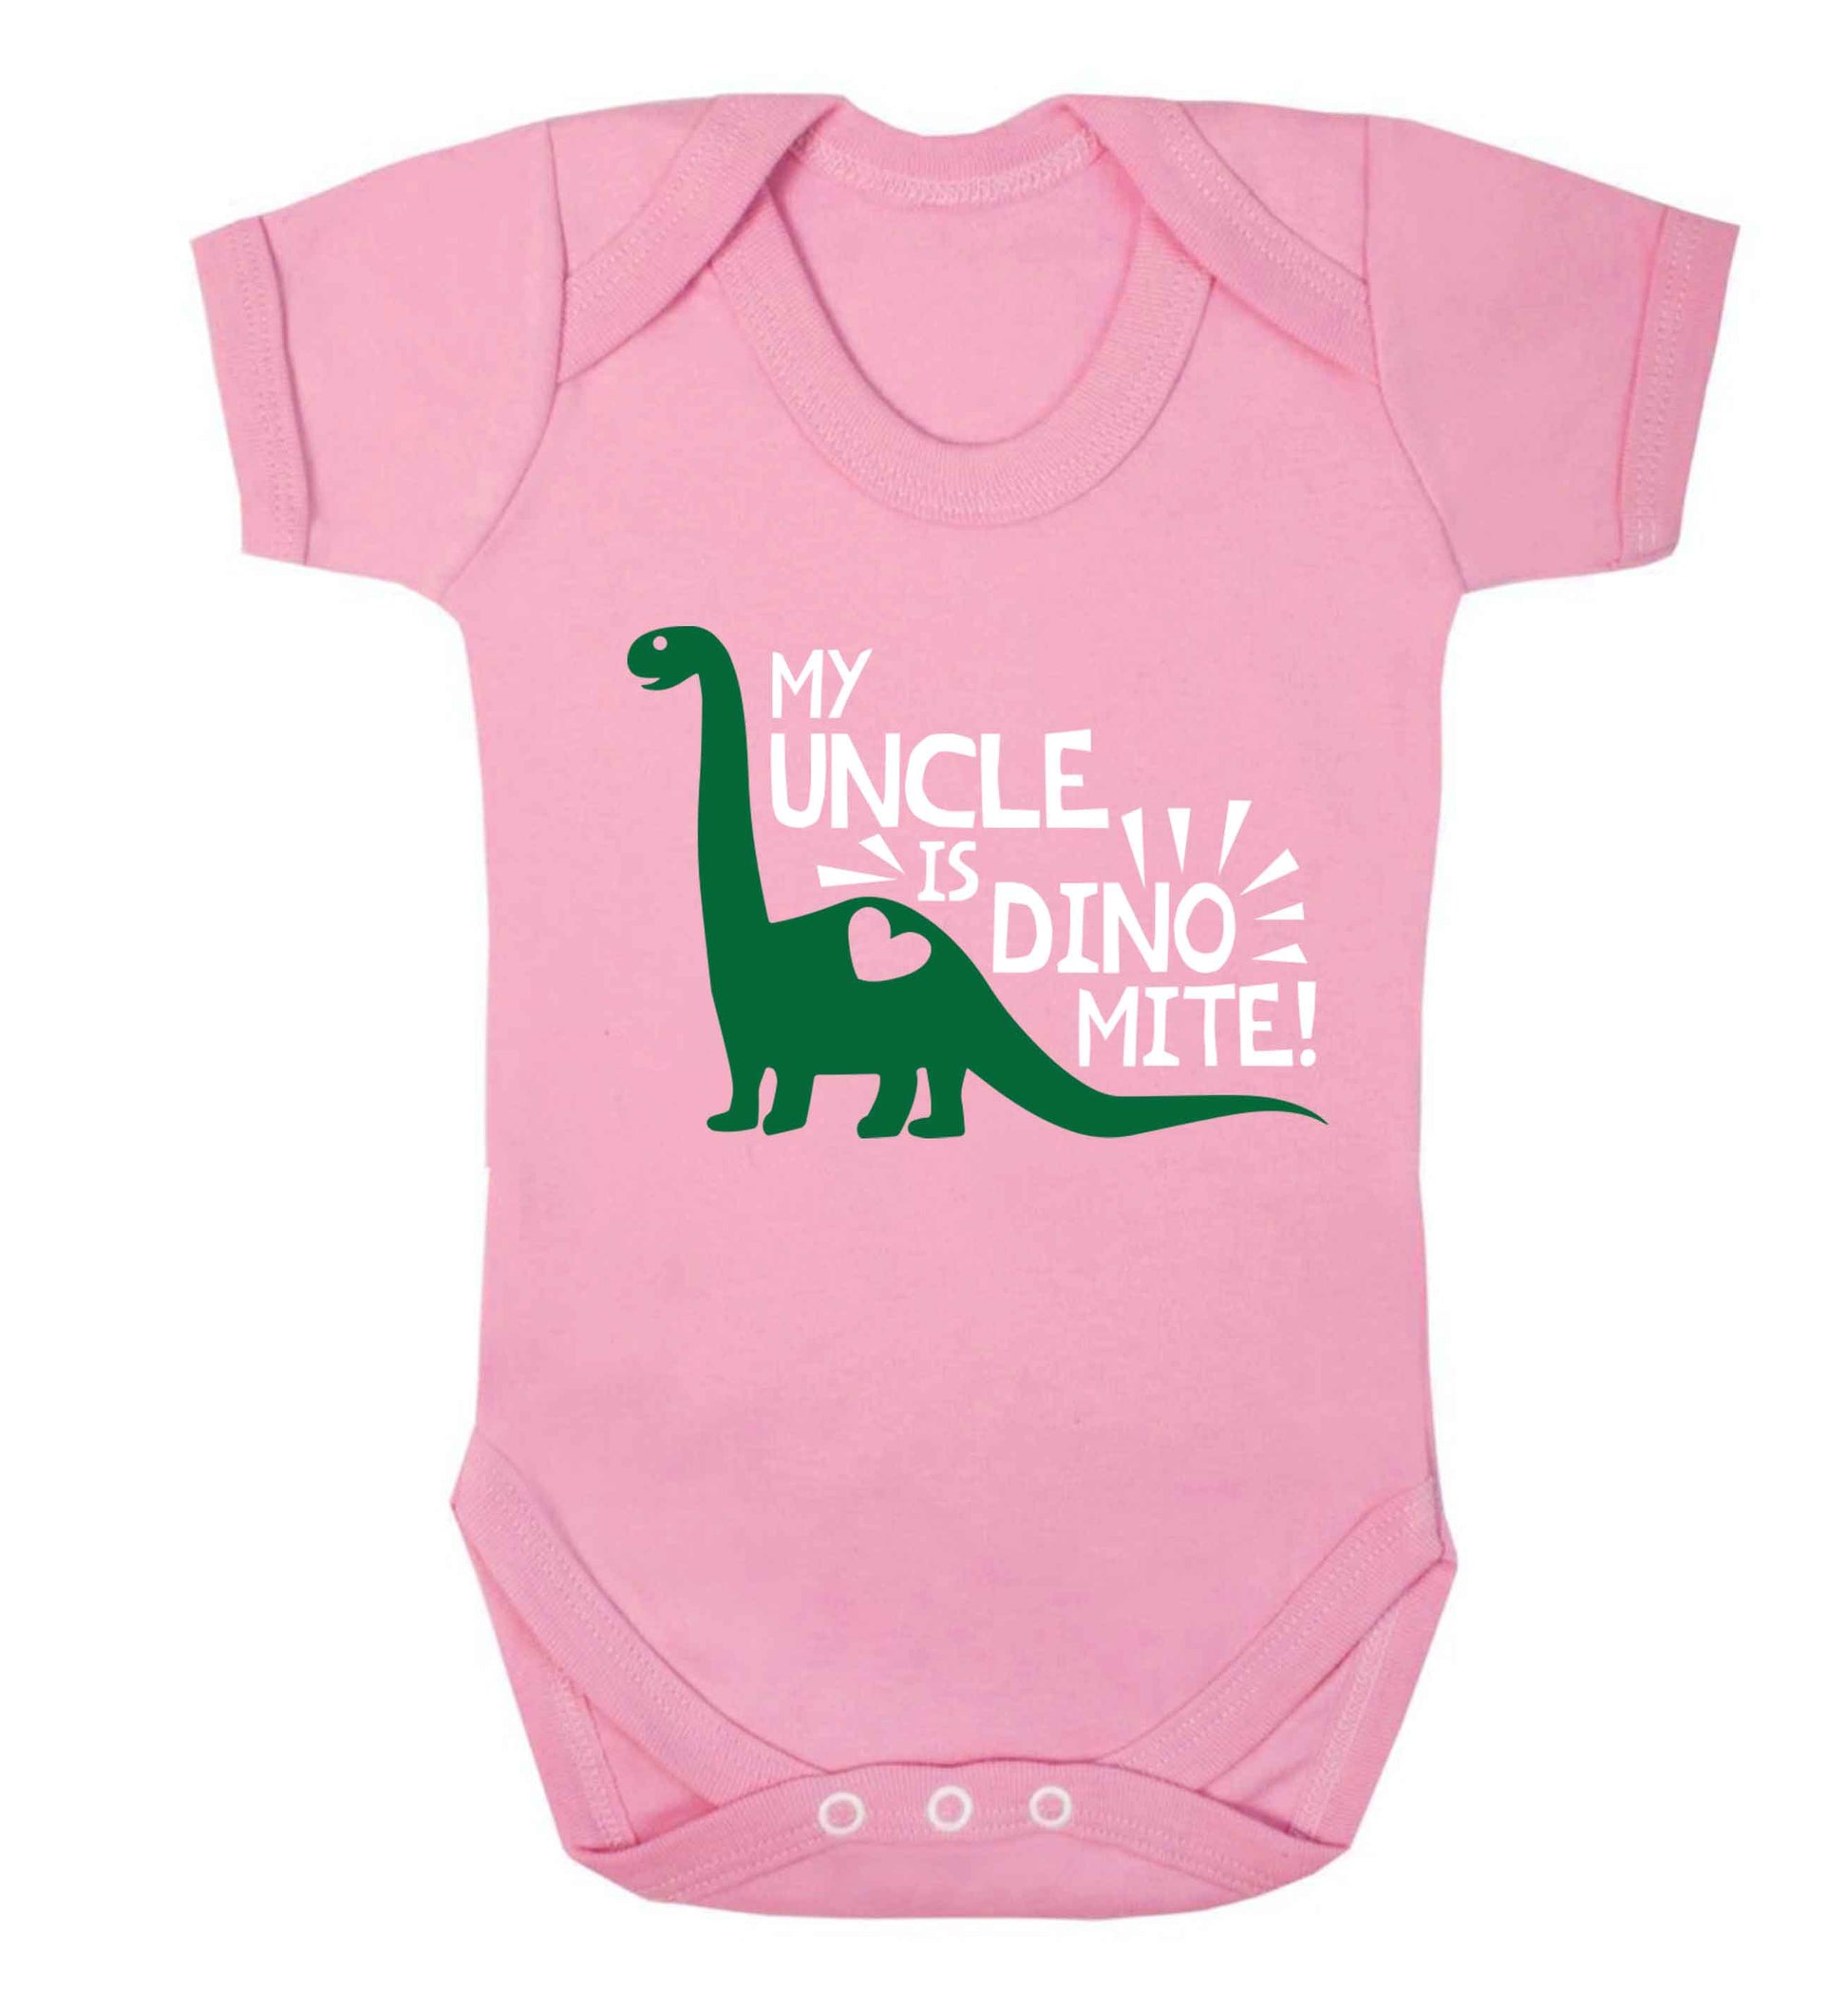 My uncle is dinomite! Baby Vest pale pink 18-24 months